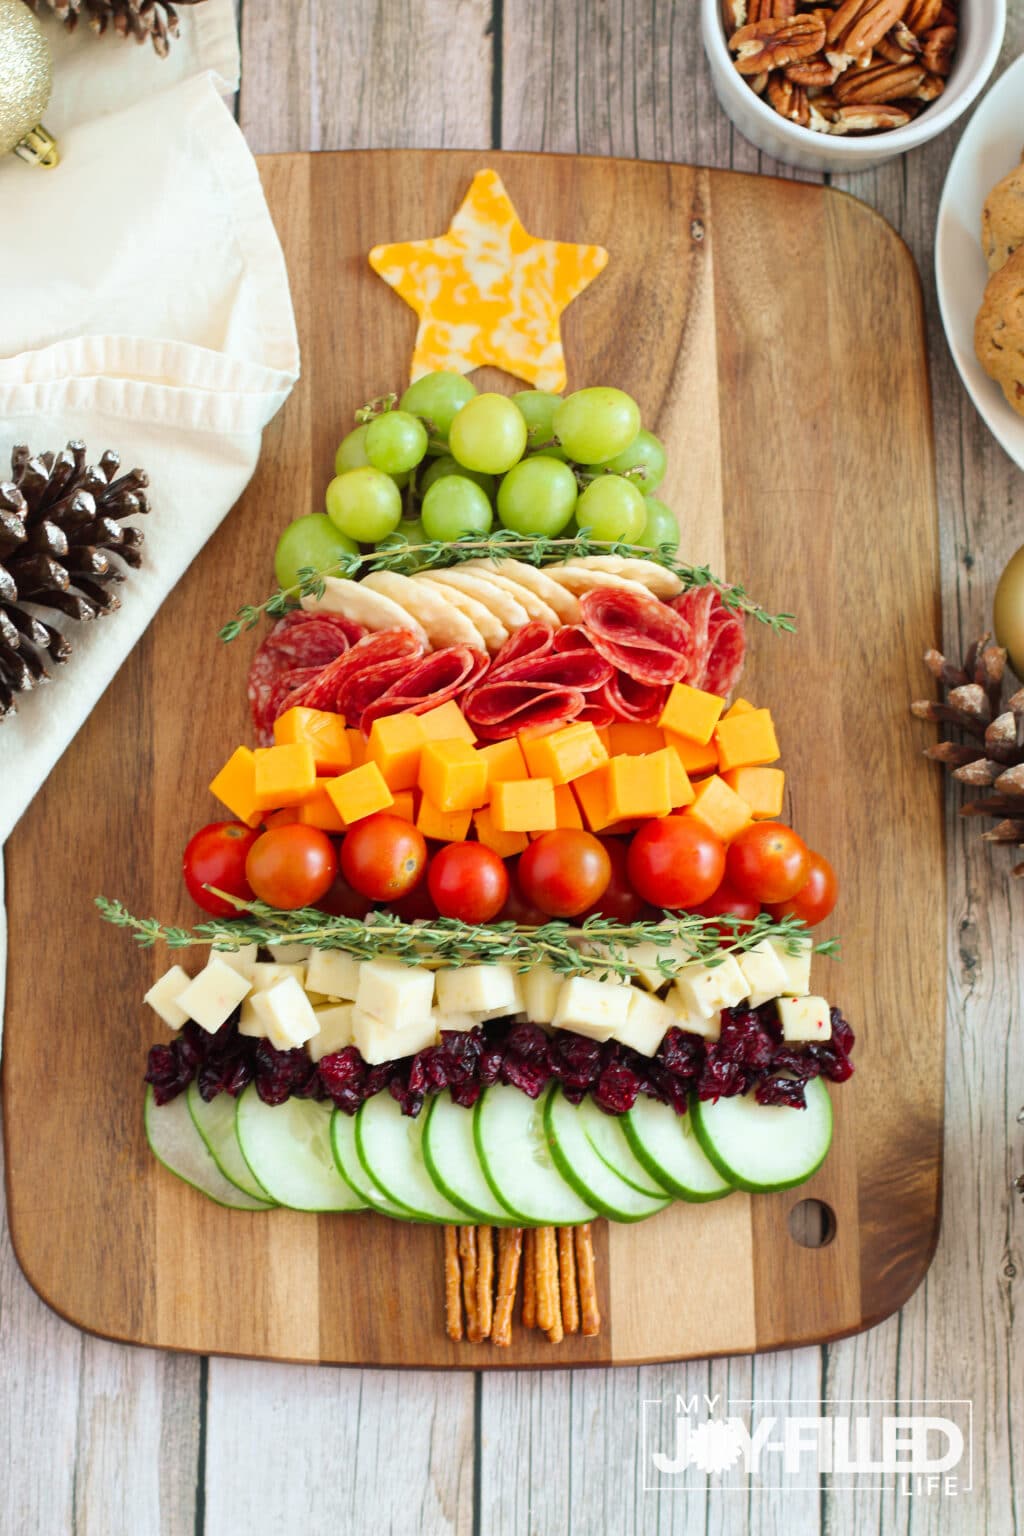 How To Make A Christmas Tree Charcuterie Board - My Joy-Filled Life